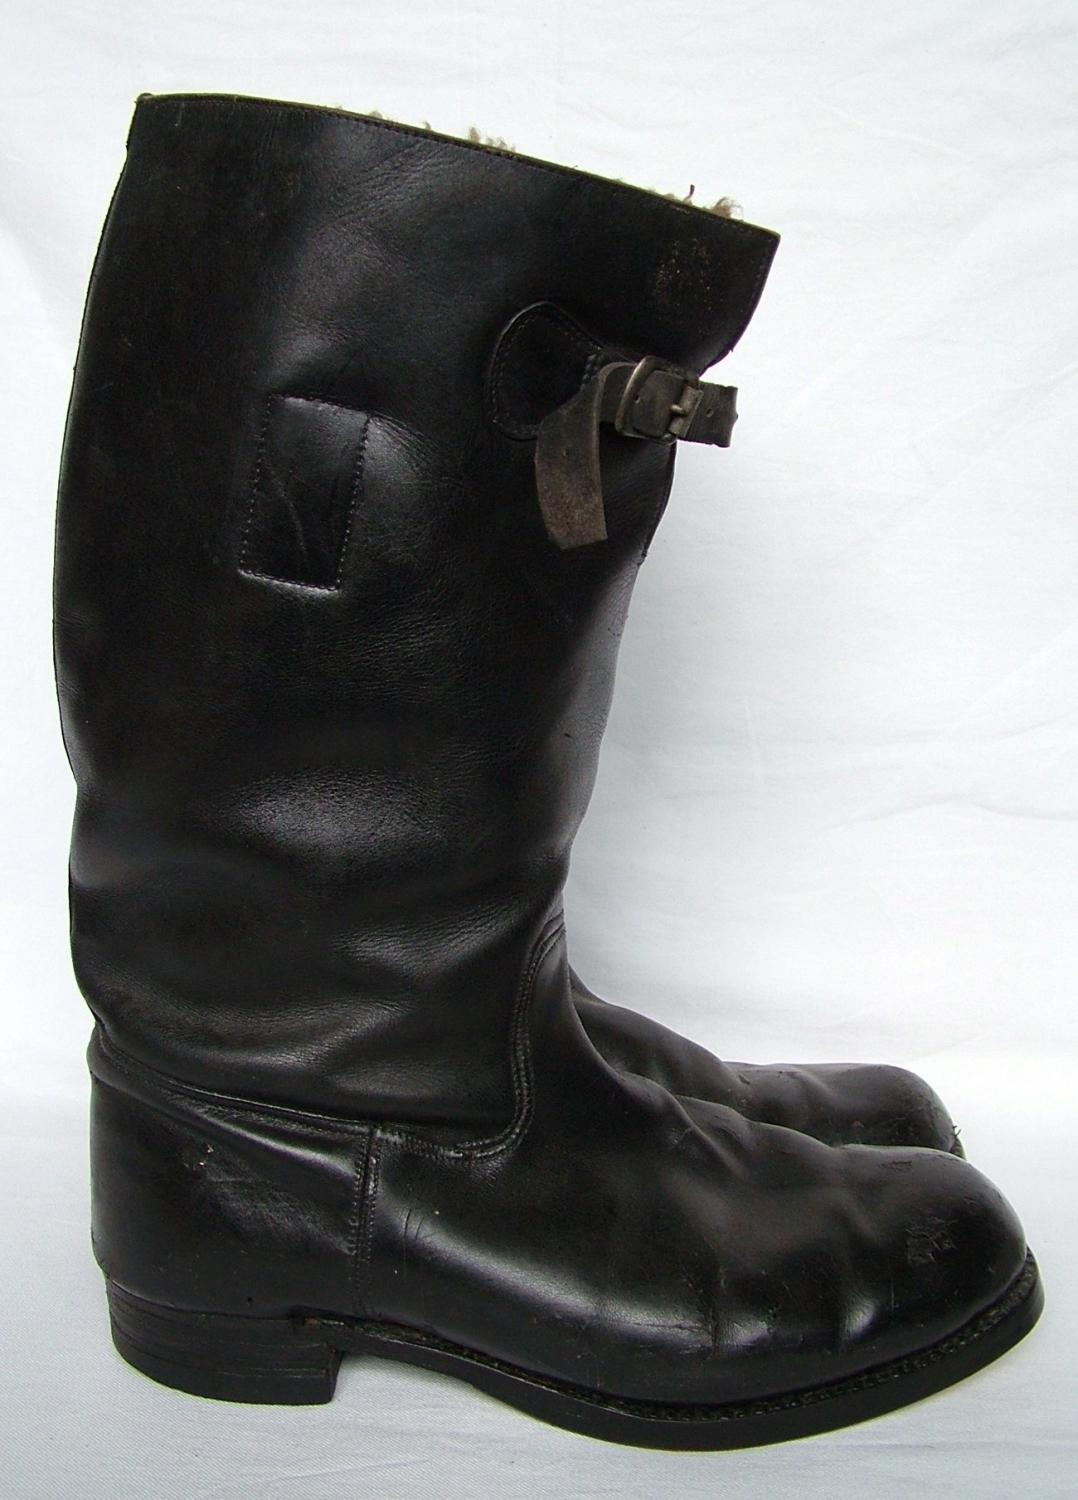 RAF 1936 Pattern Flying Boots, S8